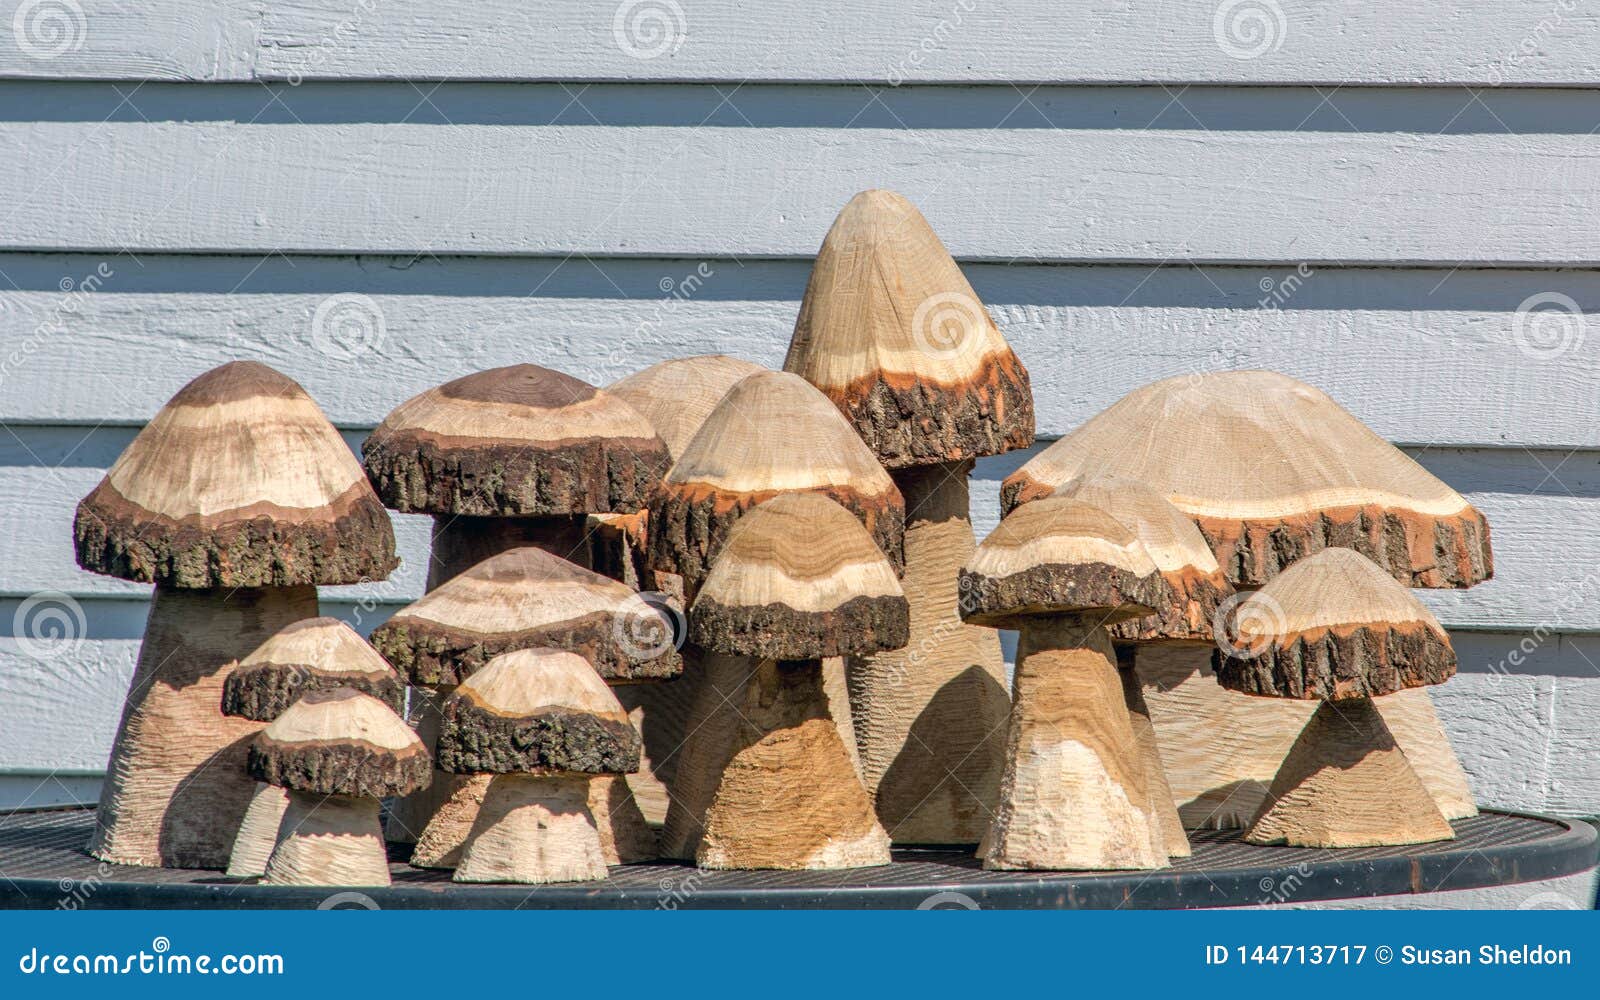 Carved Wooden Mushrooms Made from Wooden Logs Stock Image - Image of stump,  mushroom: 144713717